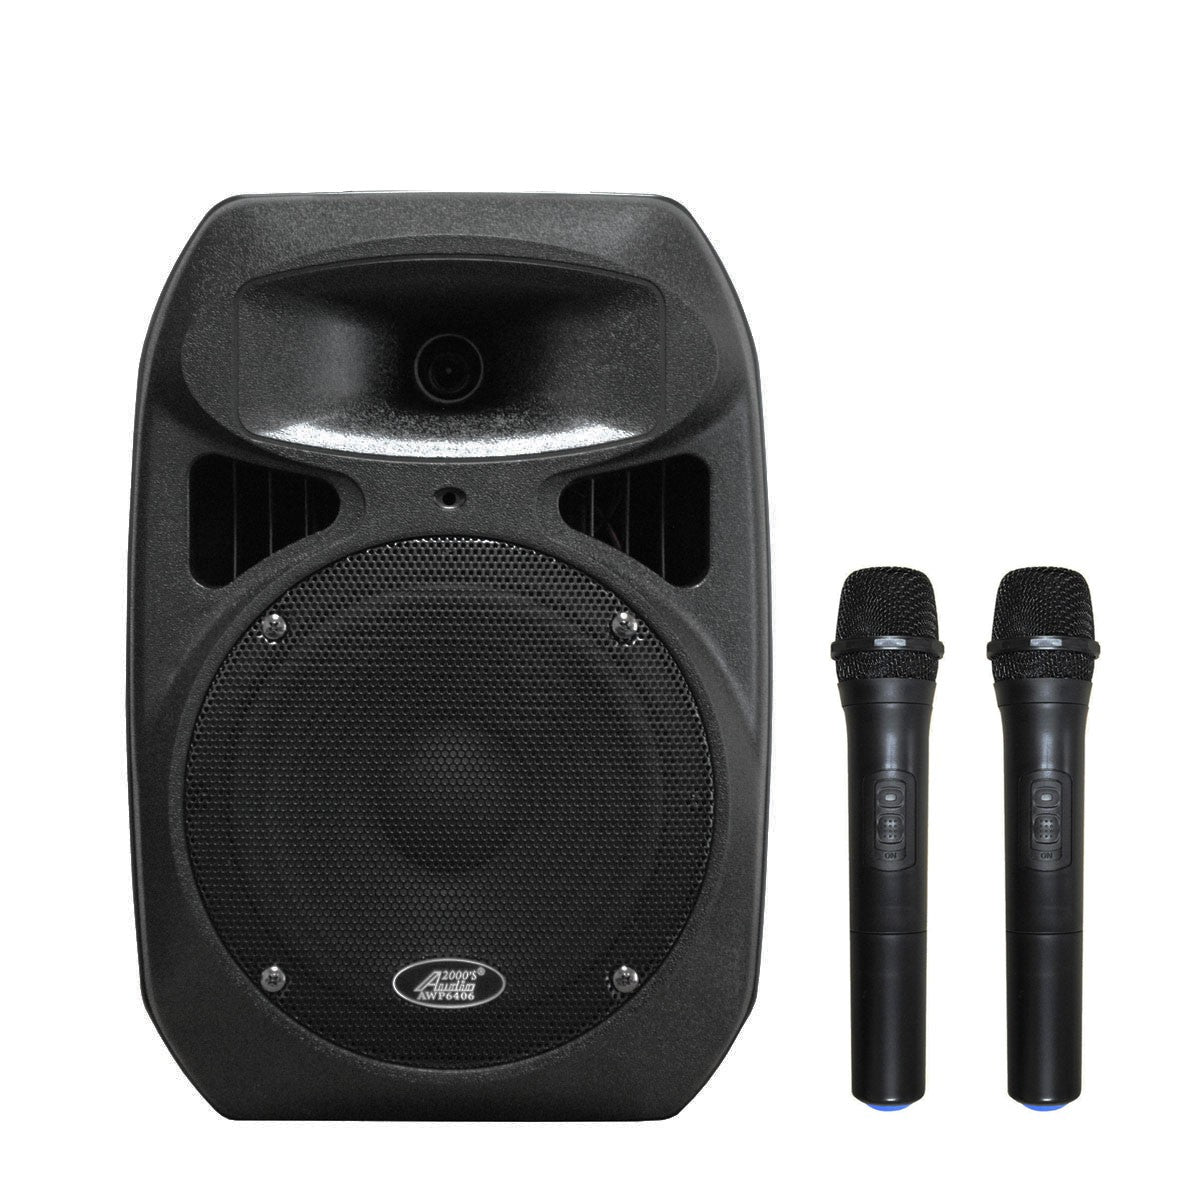 Audio 2000s RECHARGEABLE PORTABLE VHF WIRELESS PA SYSTEM W/TWO WIRELESS MICS (DUAL HANDHELD)